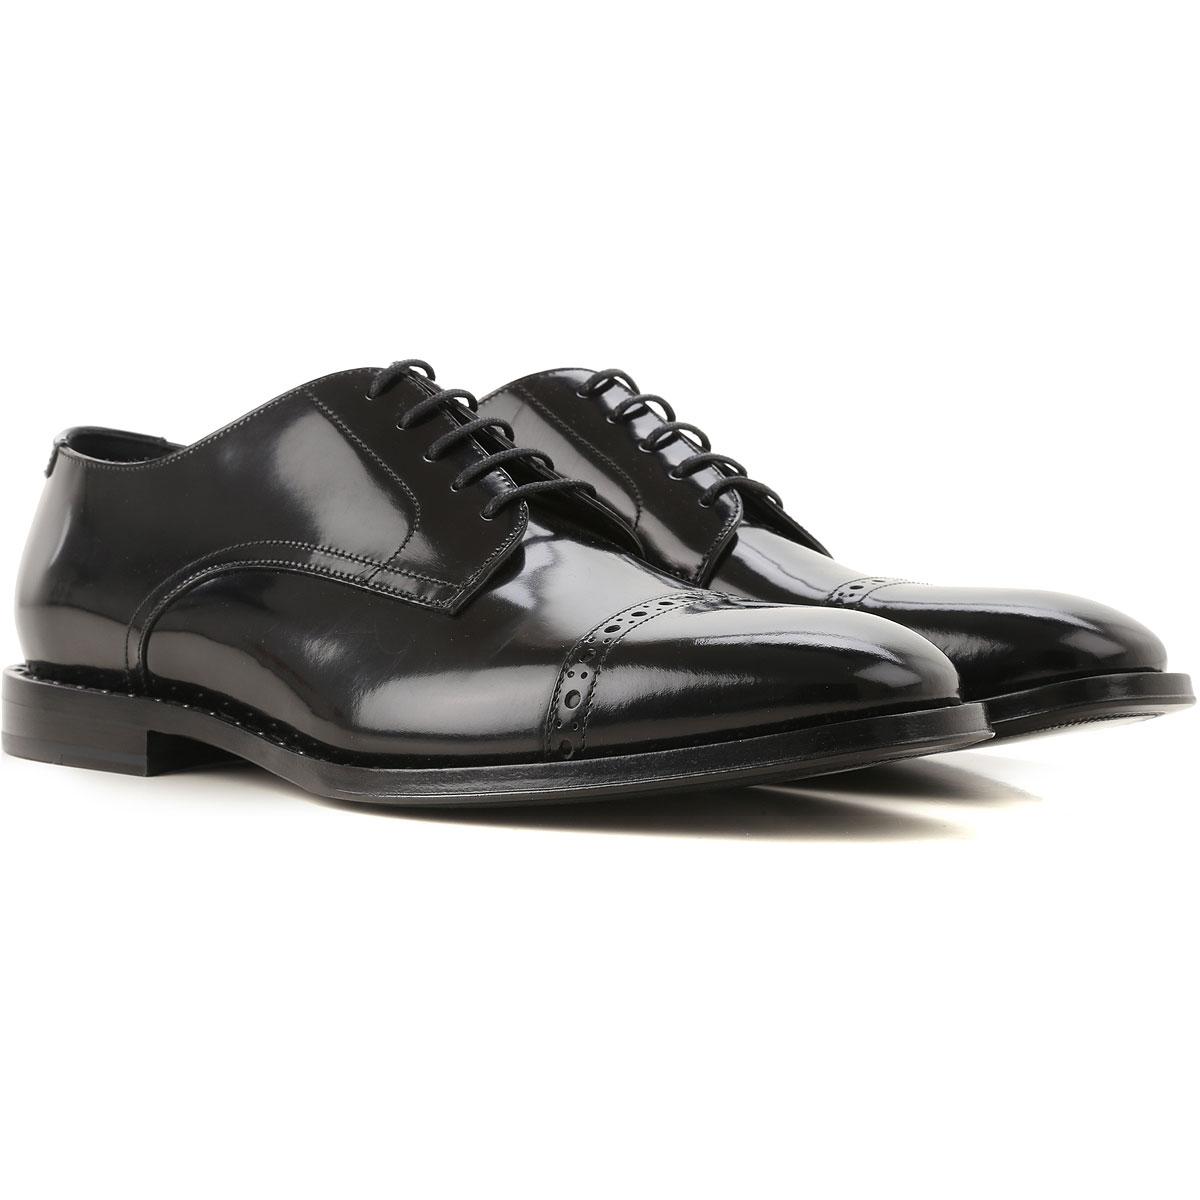 Jimmy Choo Lace Up Shoes For Men Oxfords in Black for Men - Lyst